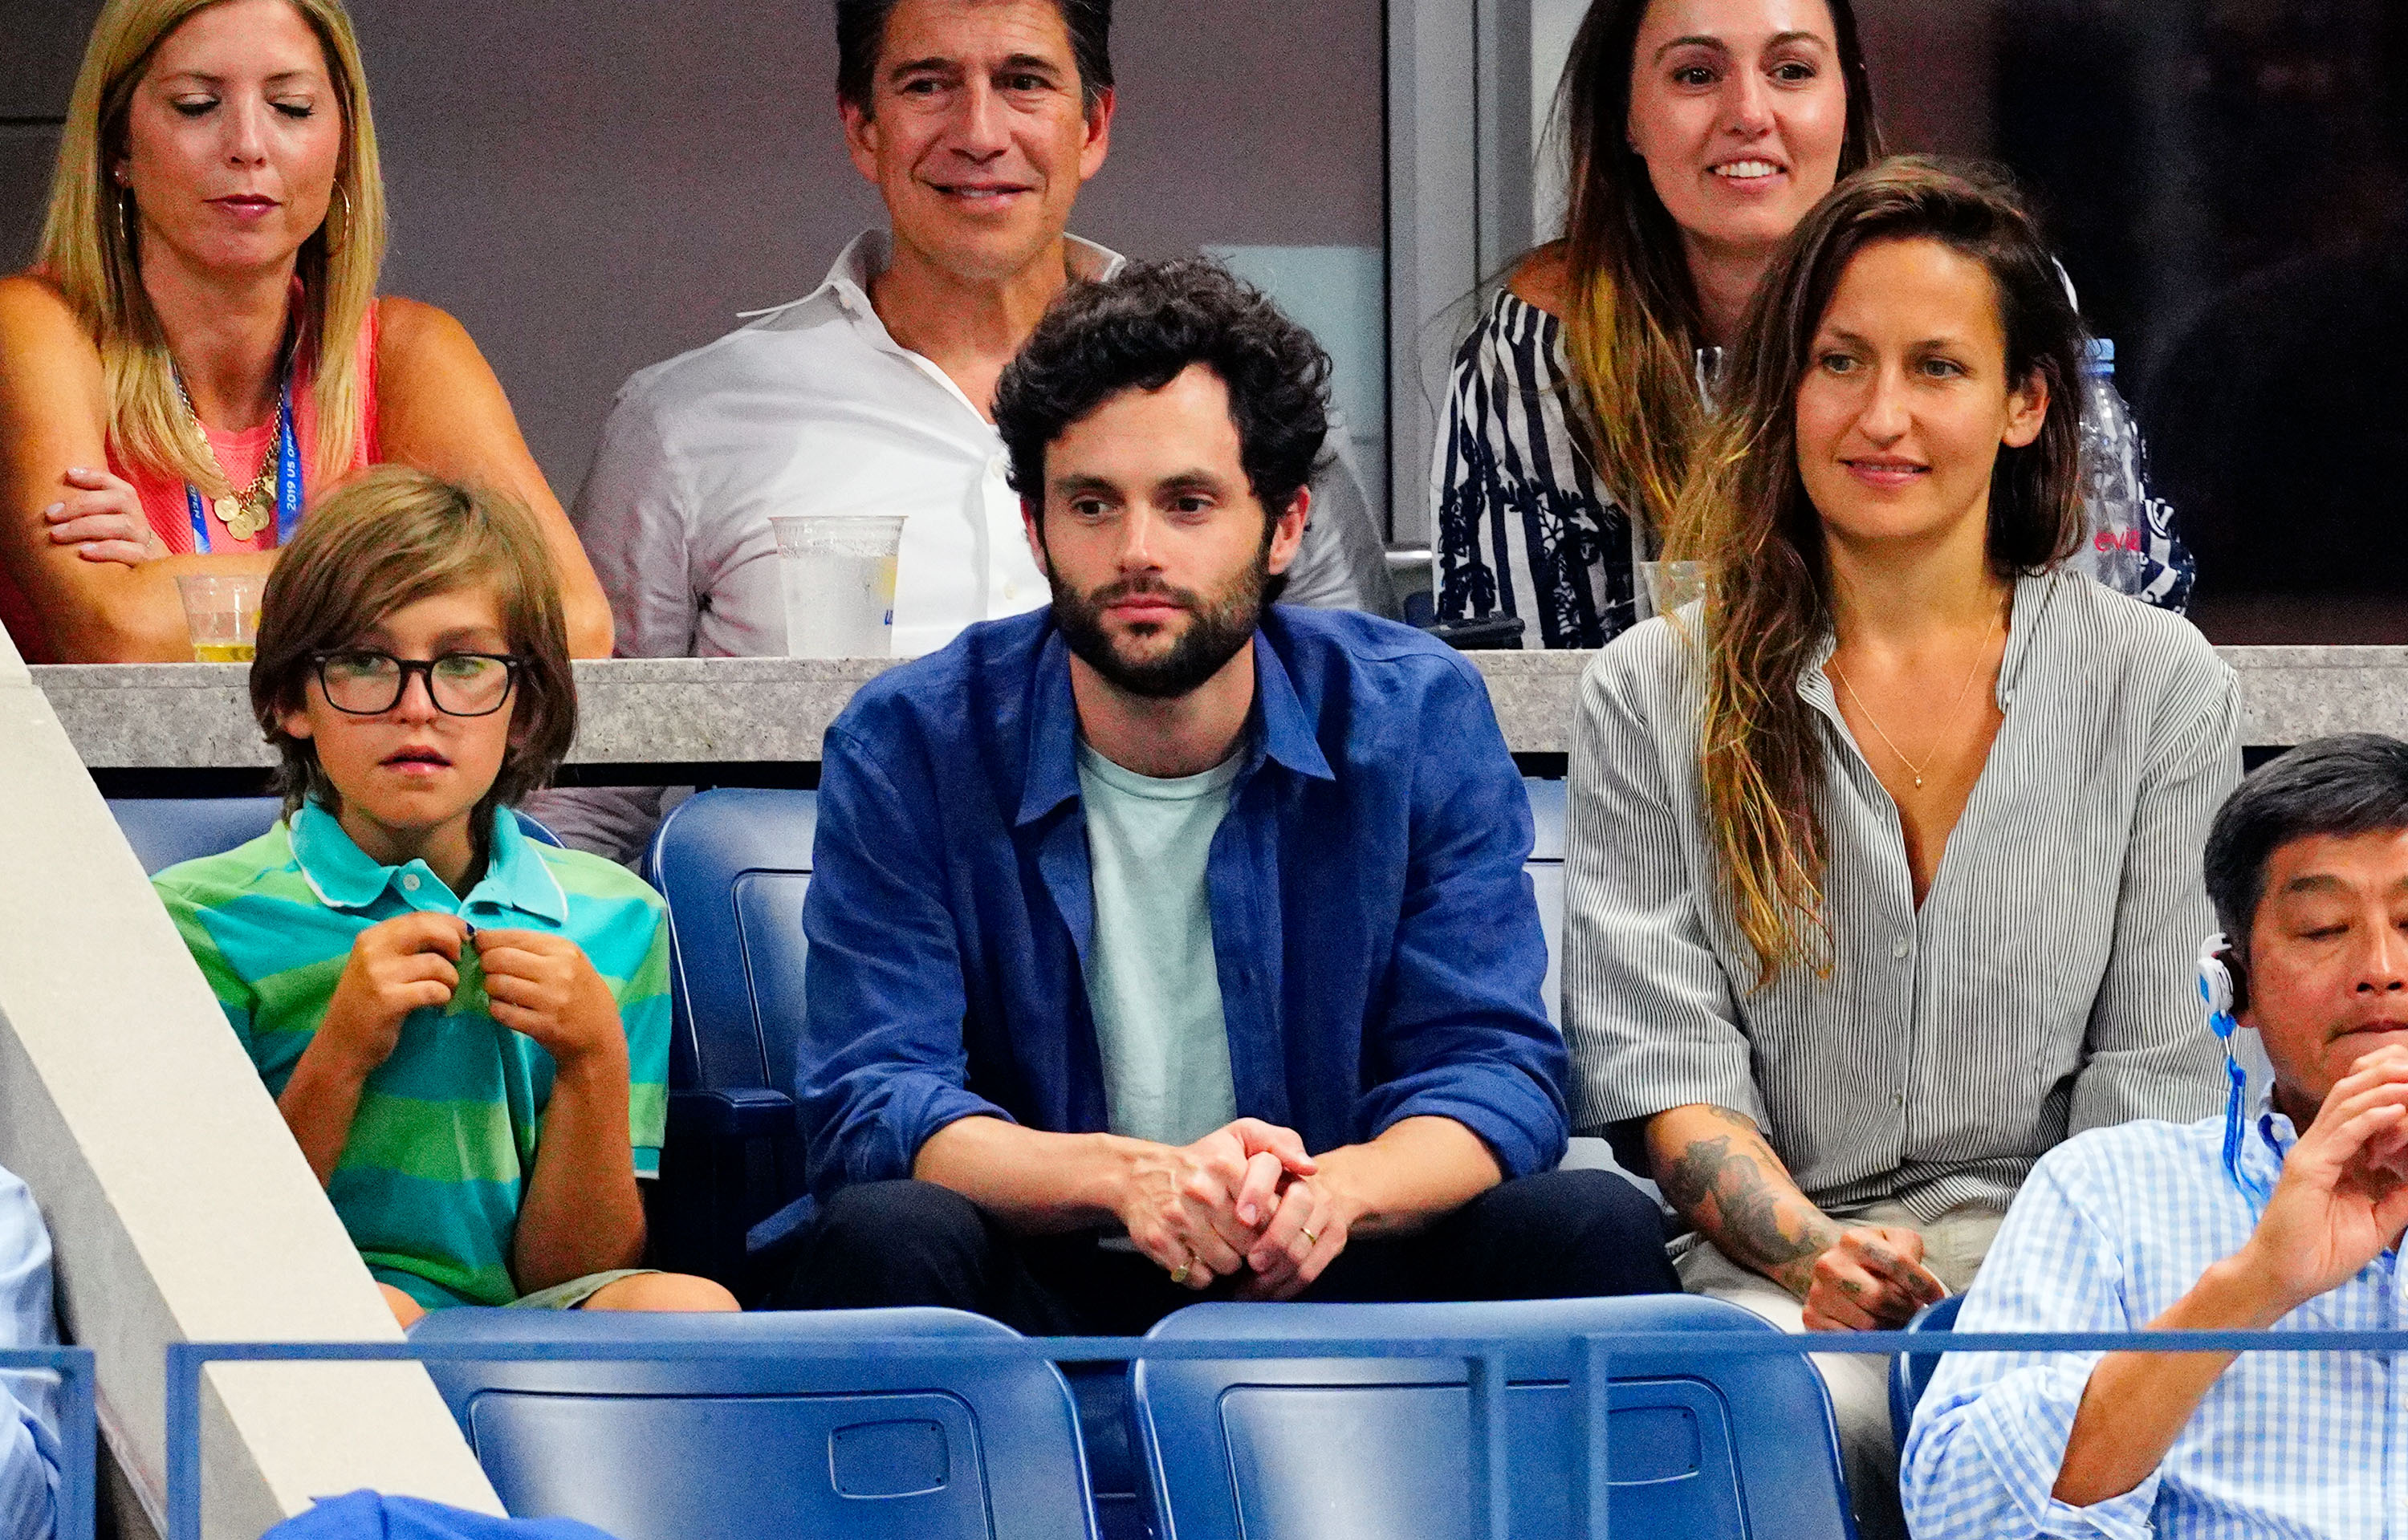 Cassius Kirke, Penn Badgley, and Domino Kirke cheer on Serena WIlliams and Roger Federer at the 2019 US Open Tennis Championships on September 3, 2019, in New York City. | Source: Getty Images